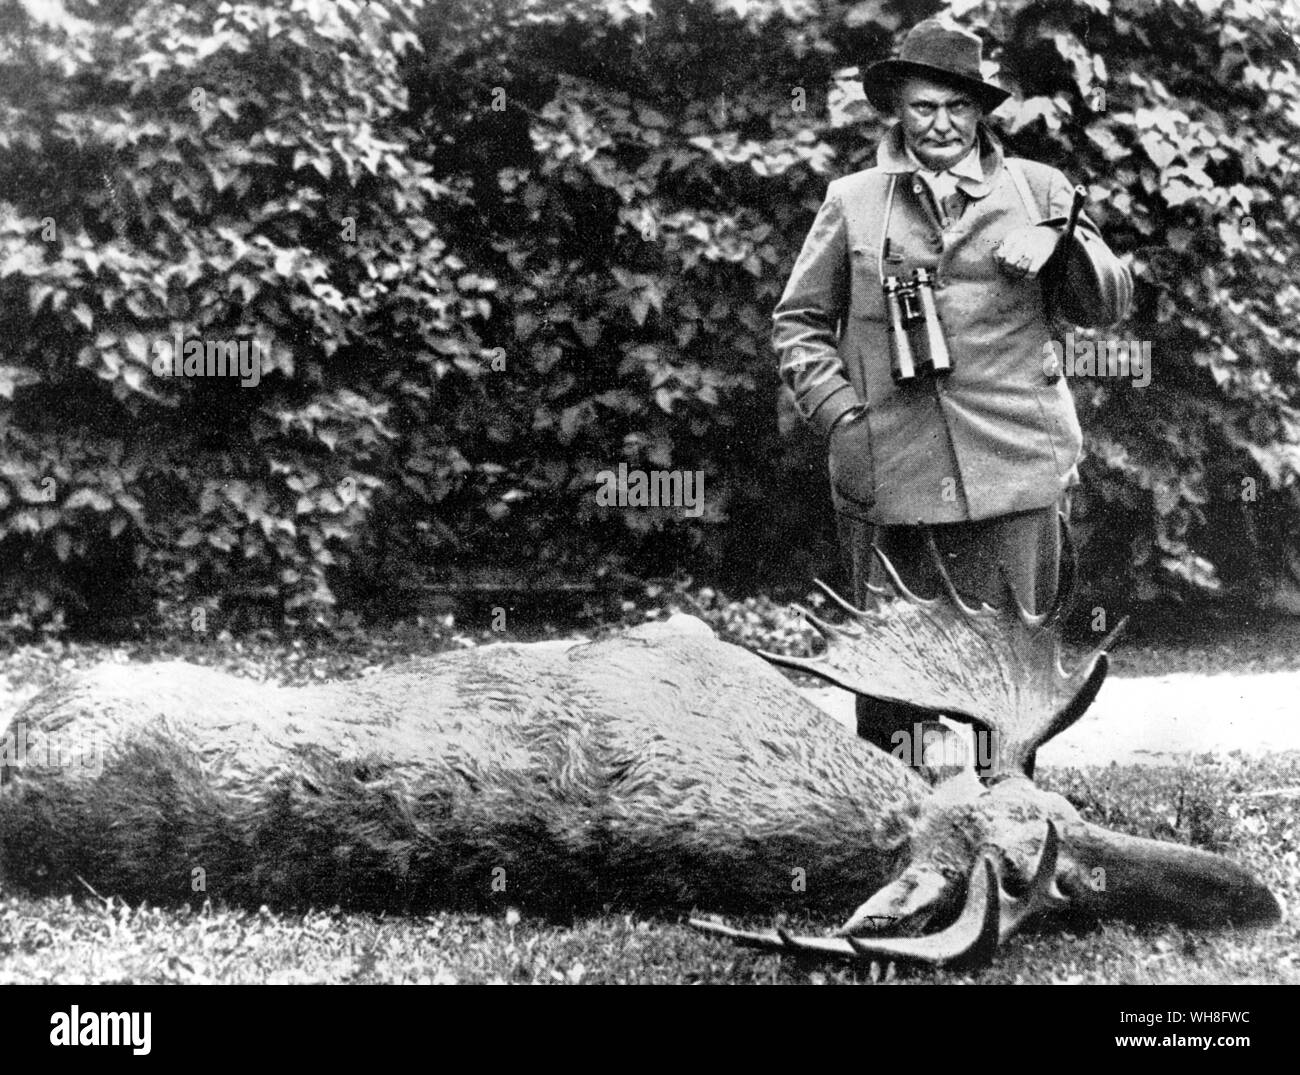 Hermann Goering as a hunter, next to a large deer that he hunted and killed. Hermann Wilhelm Göring (also Goering in English) (1893-1946) was an early member of the Nazi party, Commander of the Luftwaffe, and one of the main leaders of Nazi Germany. . . . Stock Photo